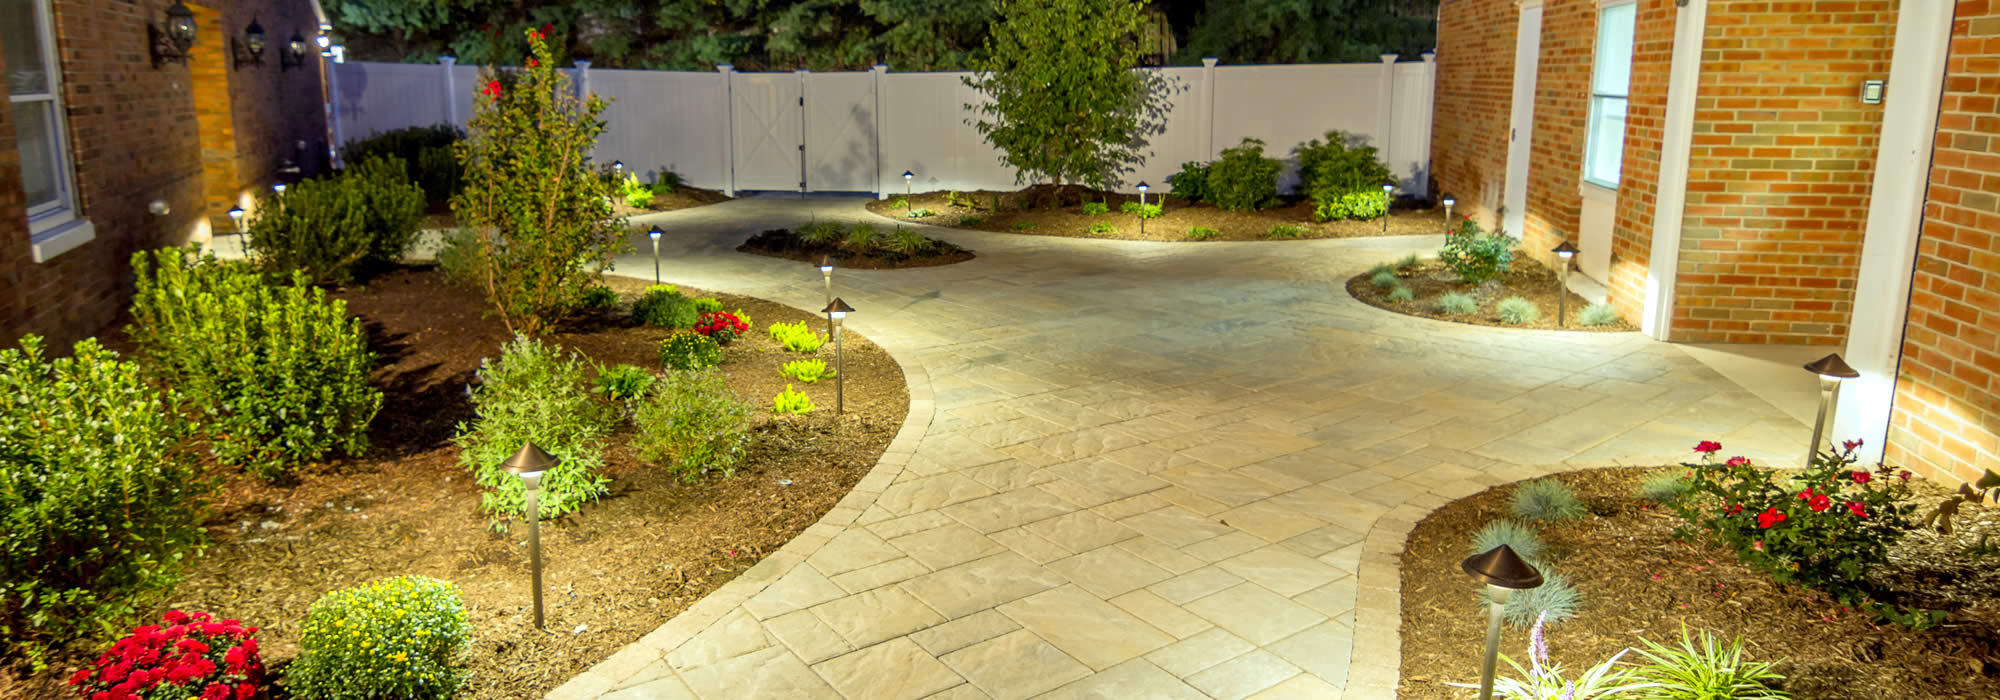 Landscaping Services in Fitchburg